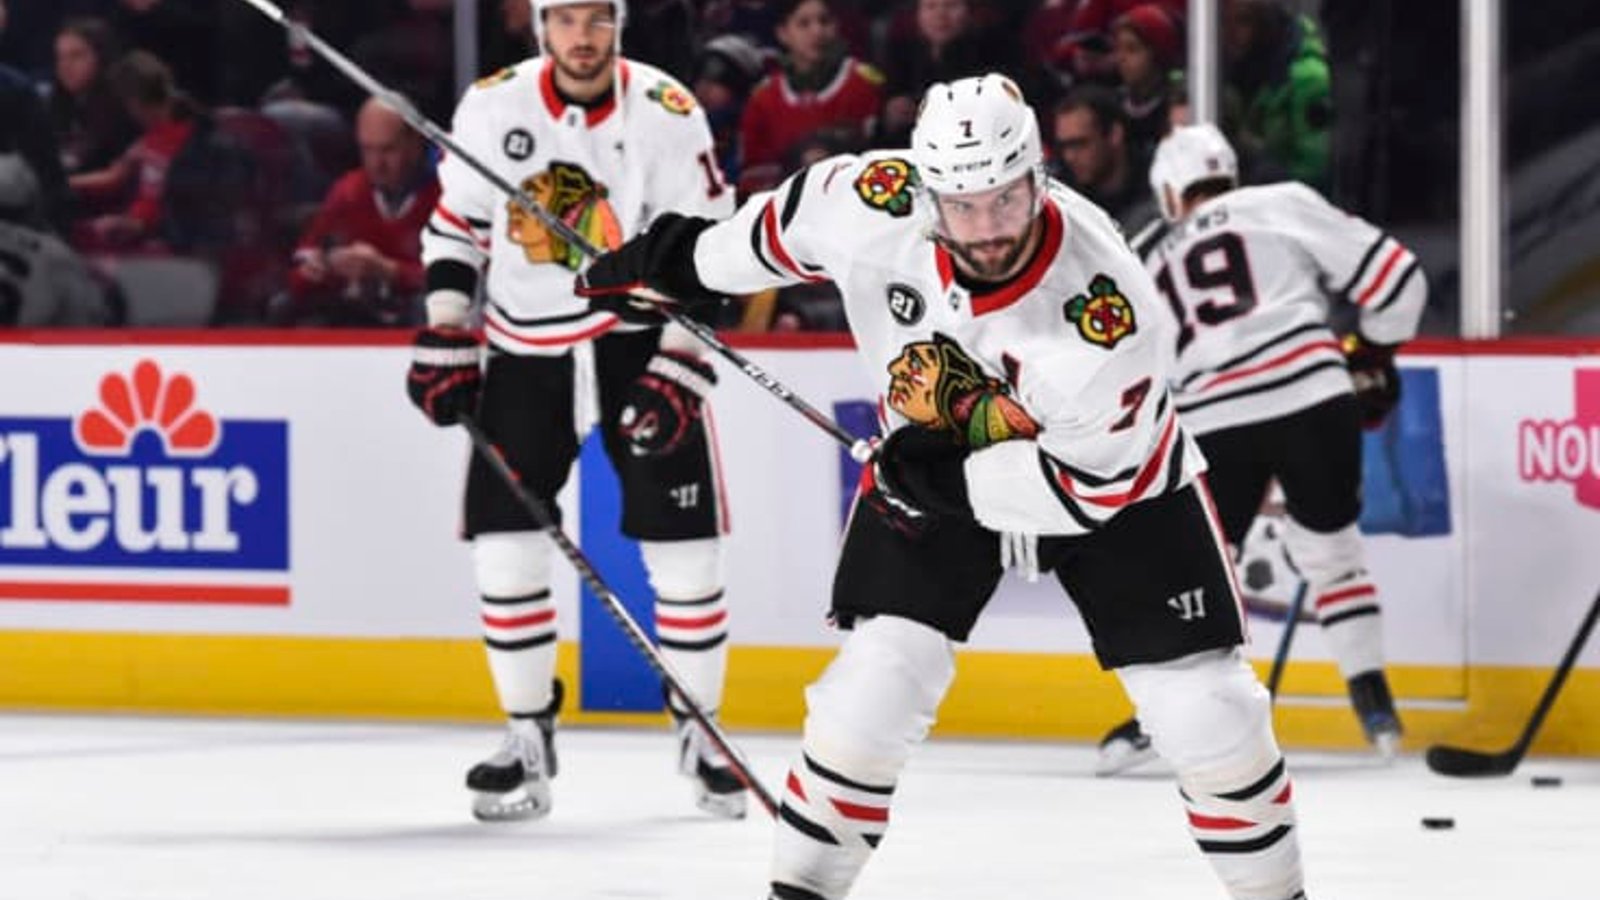 Blackhawks forced to make a trade due to surplus of players